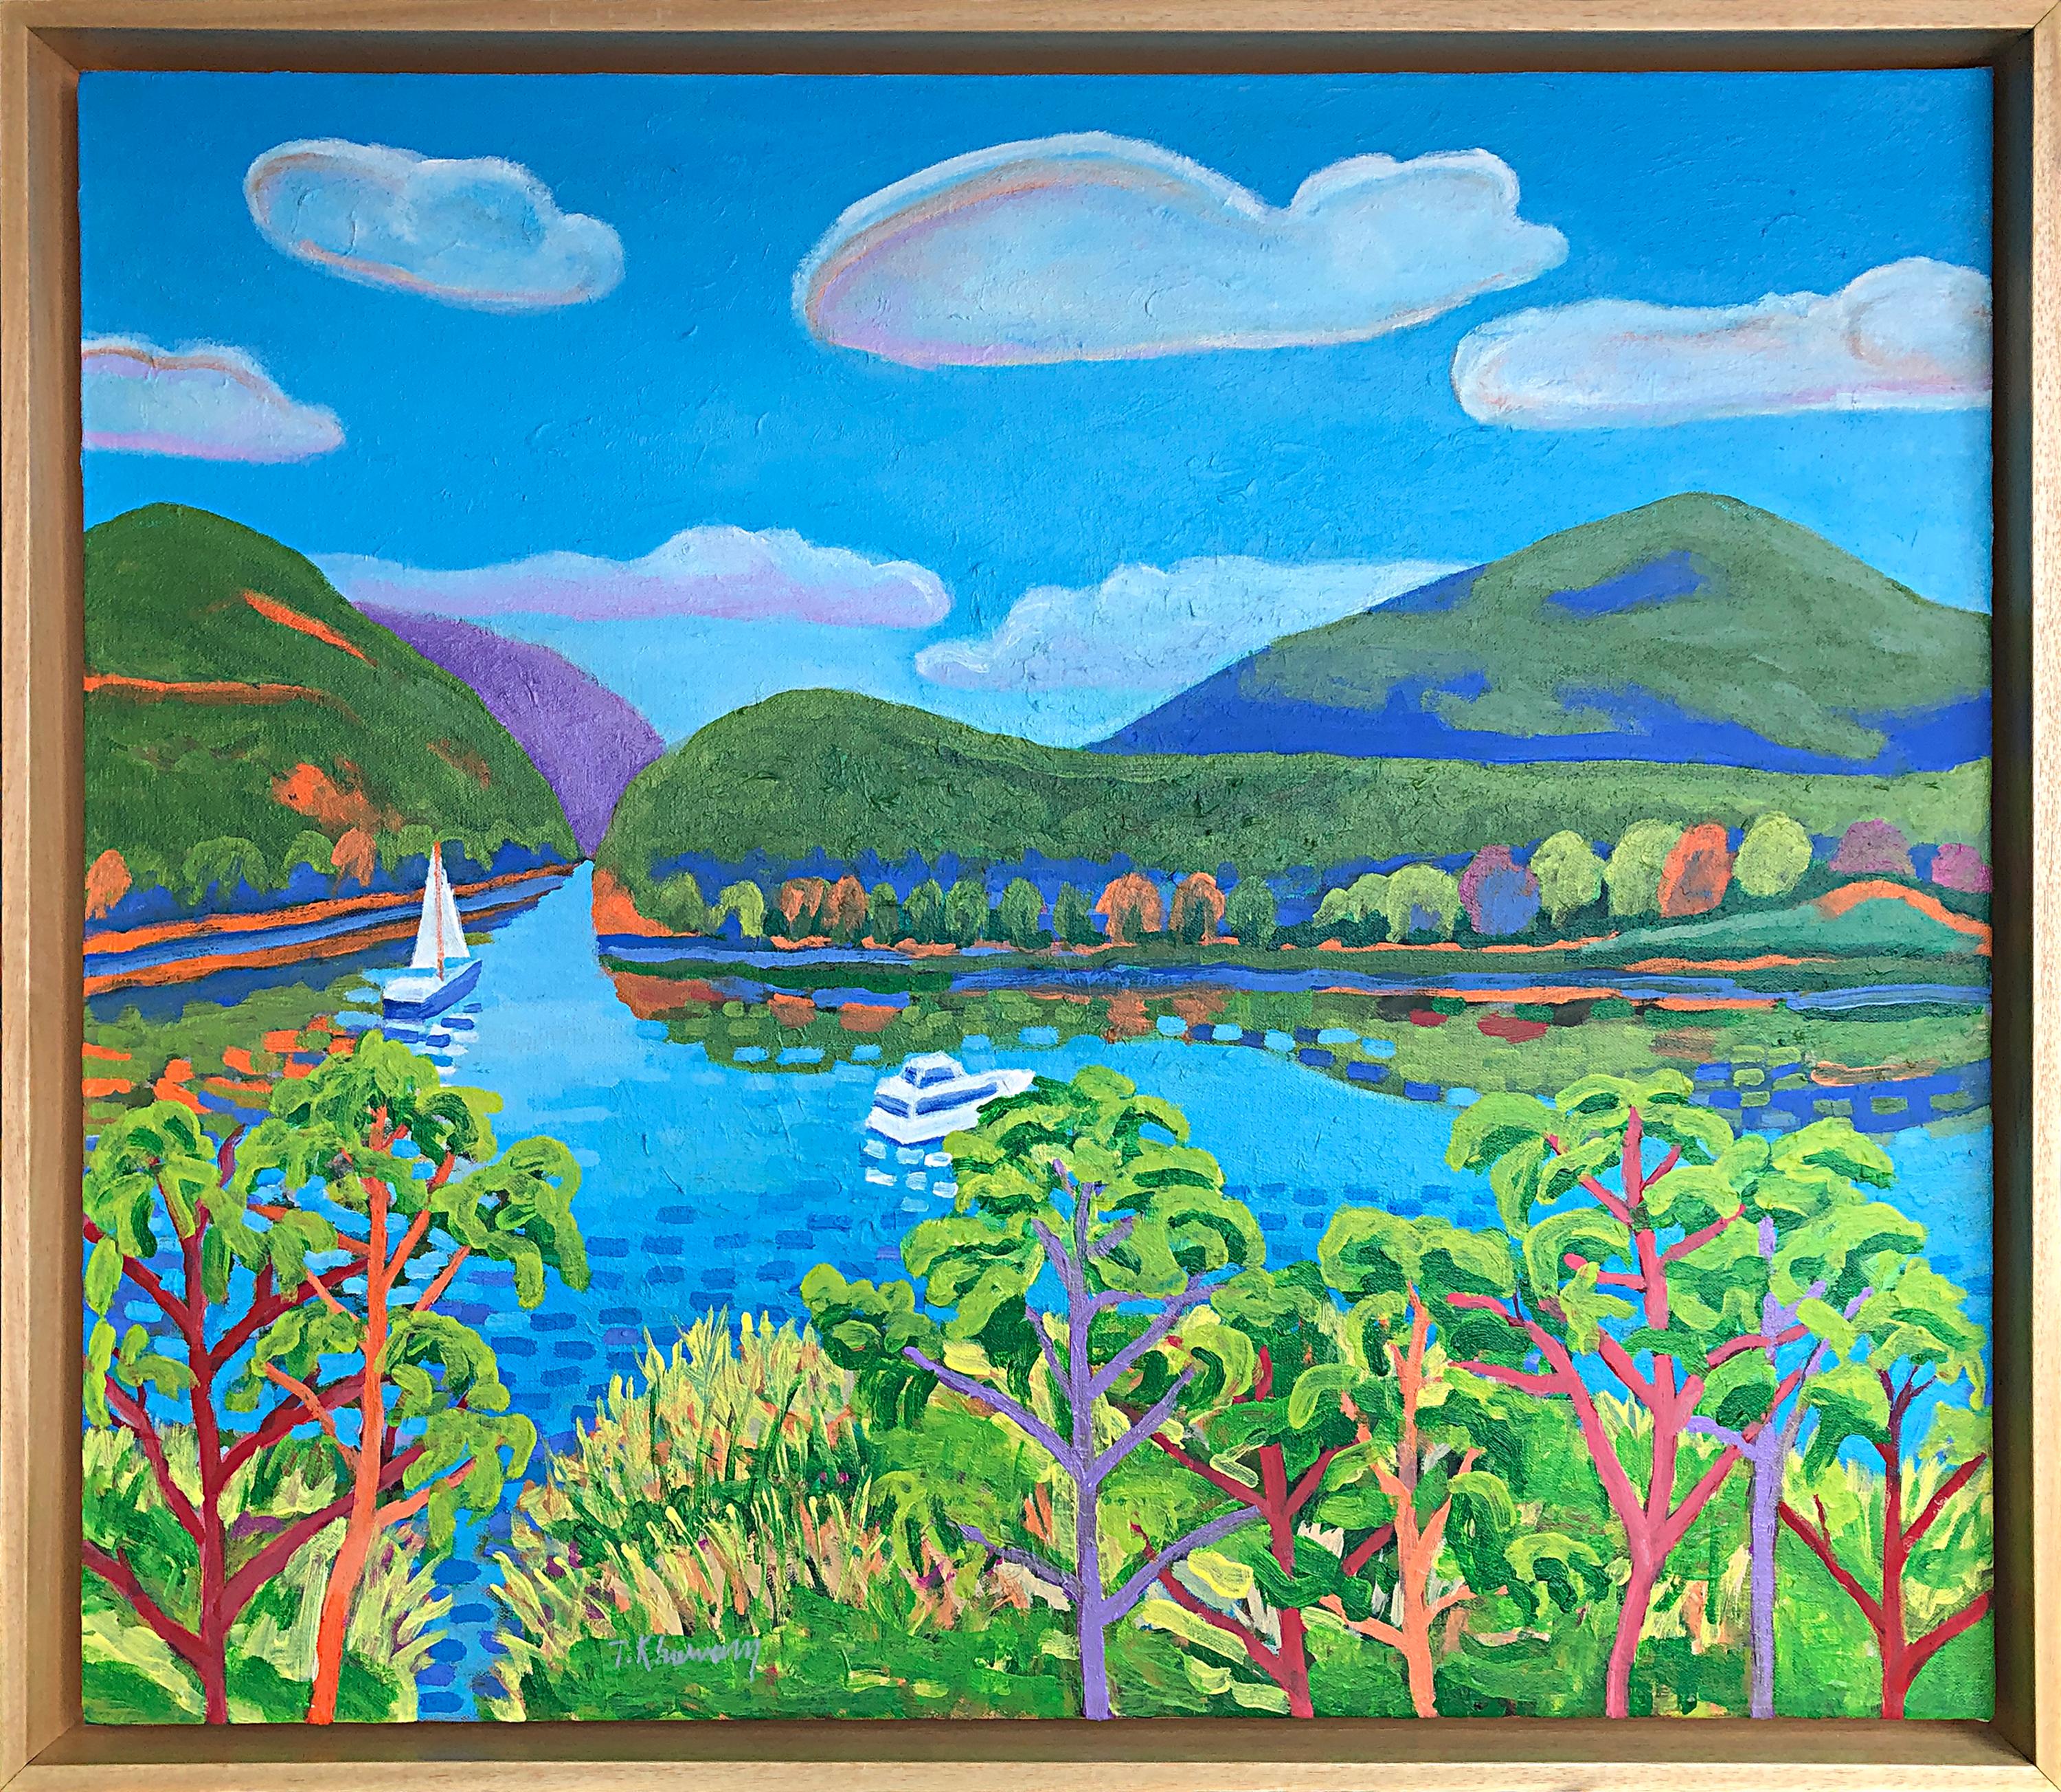 Tony Khawam Landscape Painting - Constitution Island at West Point